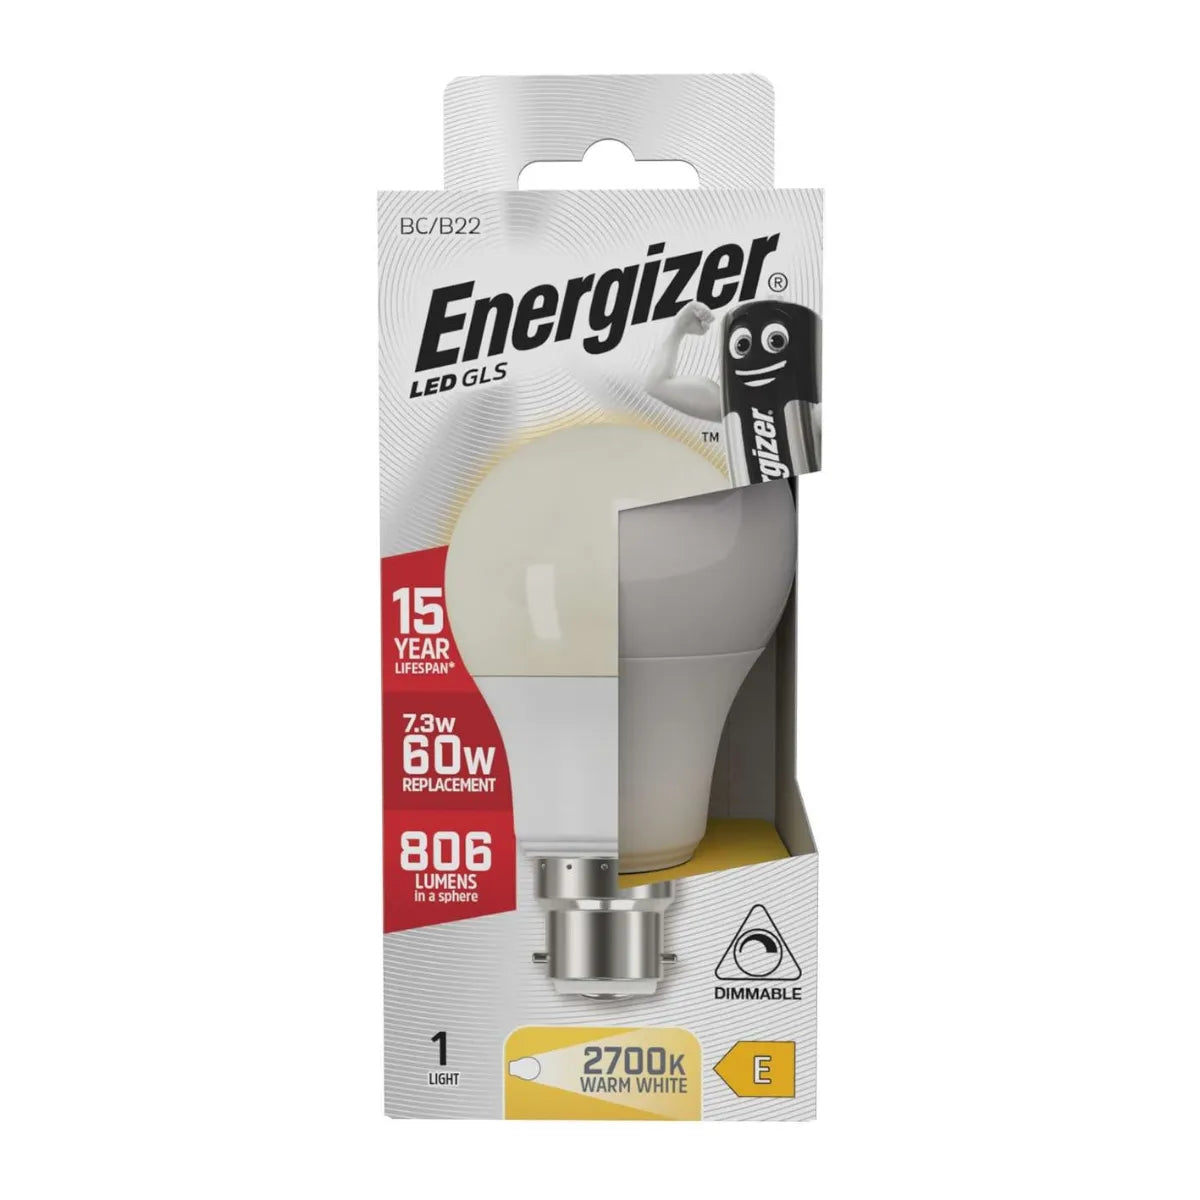 Energizer LED GLS B22 (BC) 806lm 8.8W 2,700K, Warm White, Dimmable